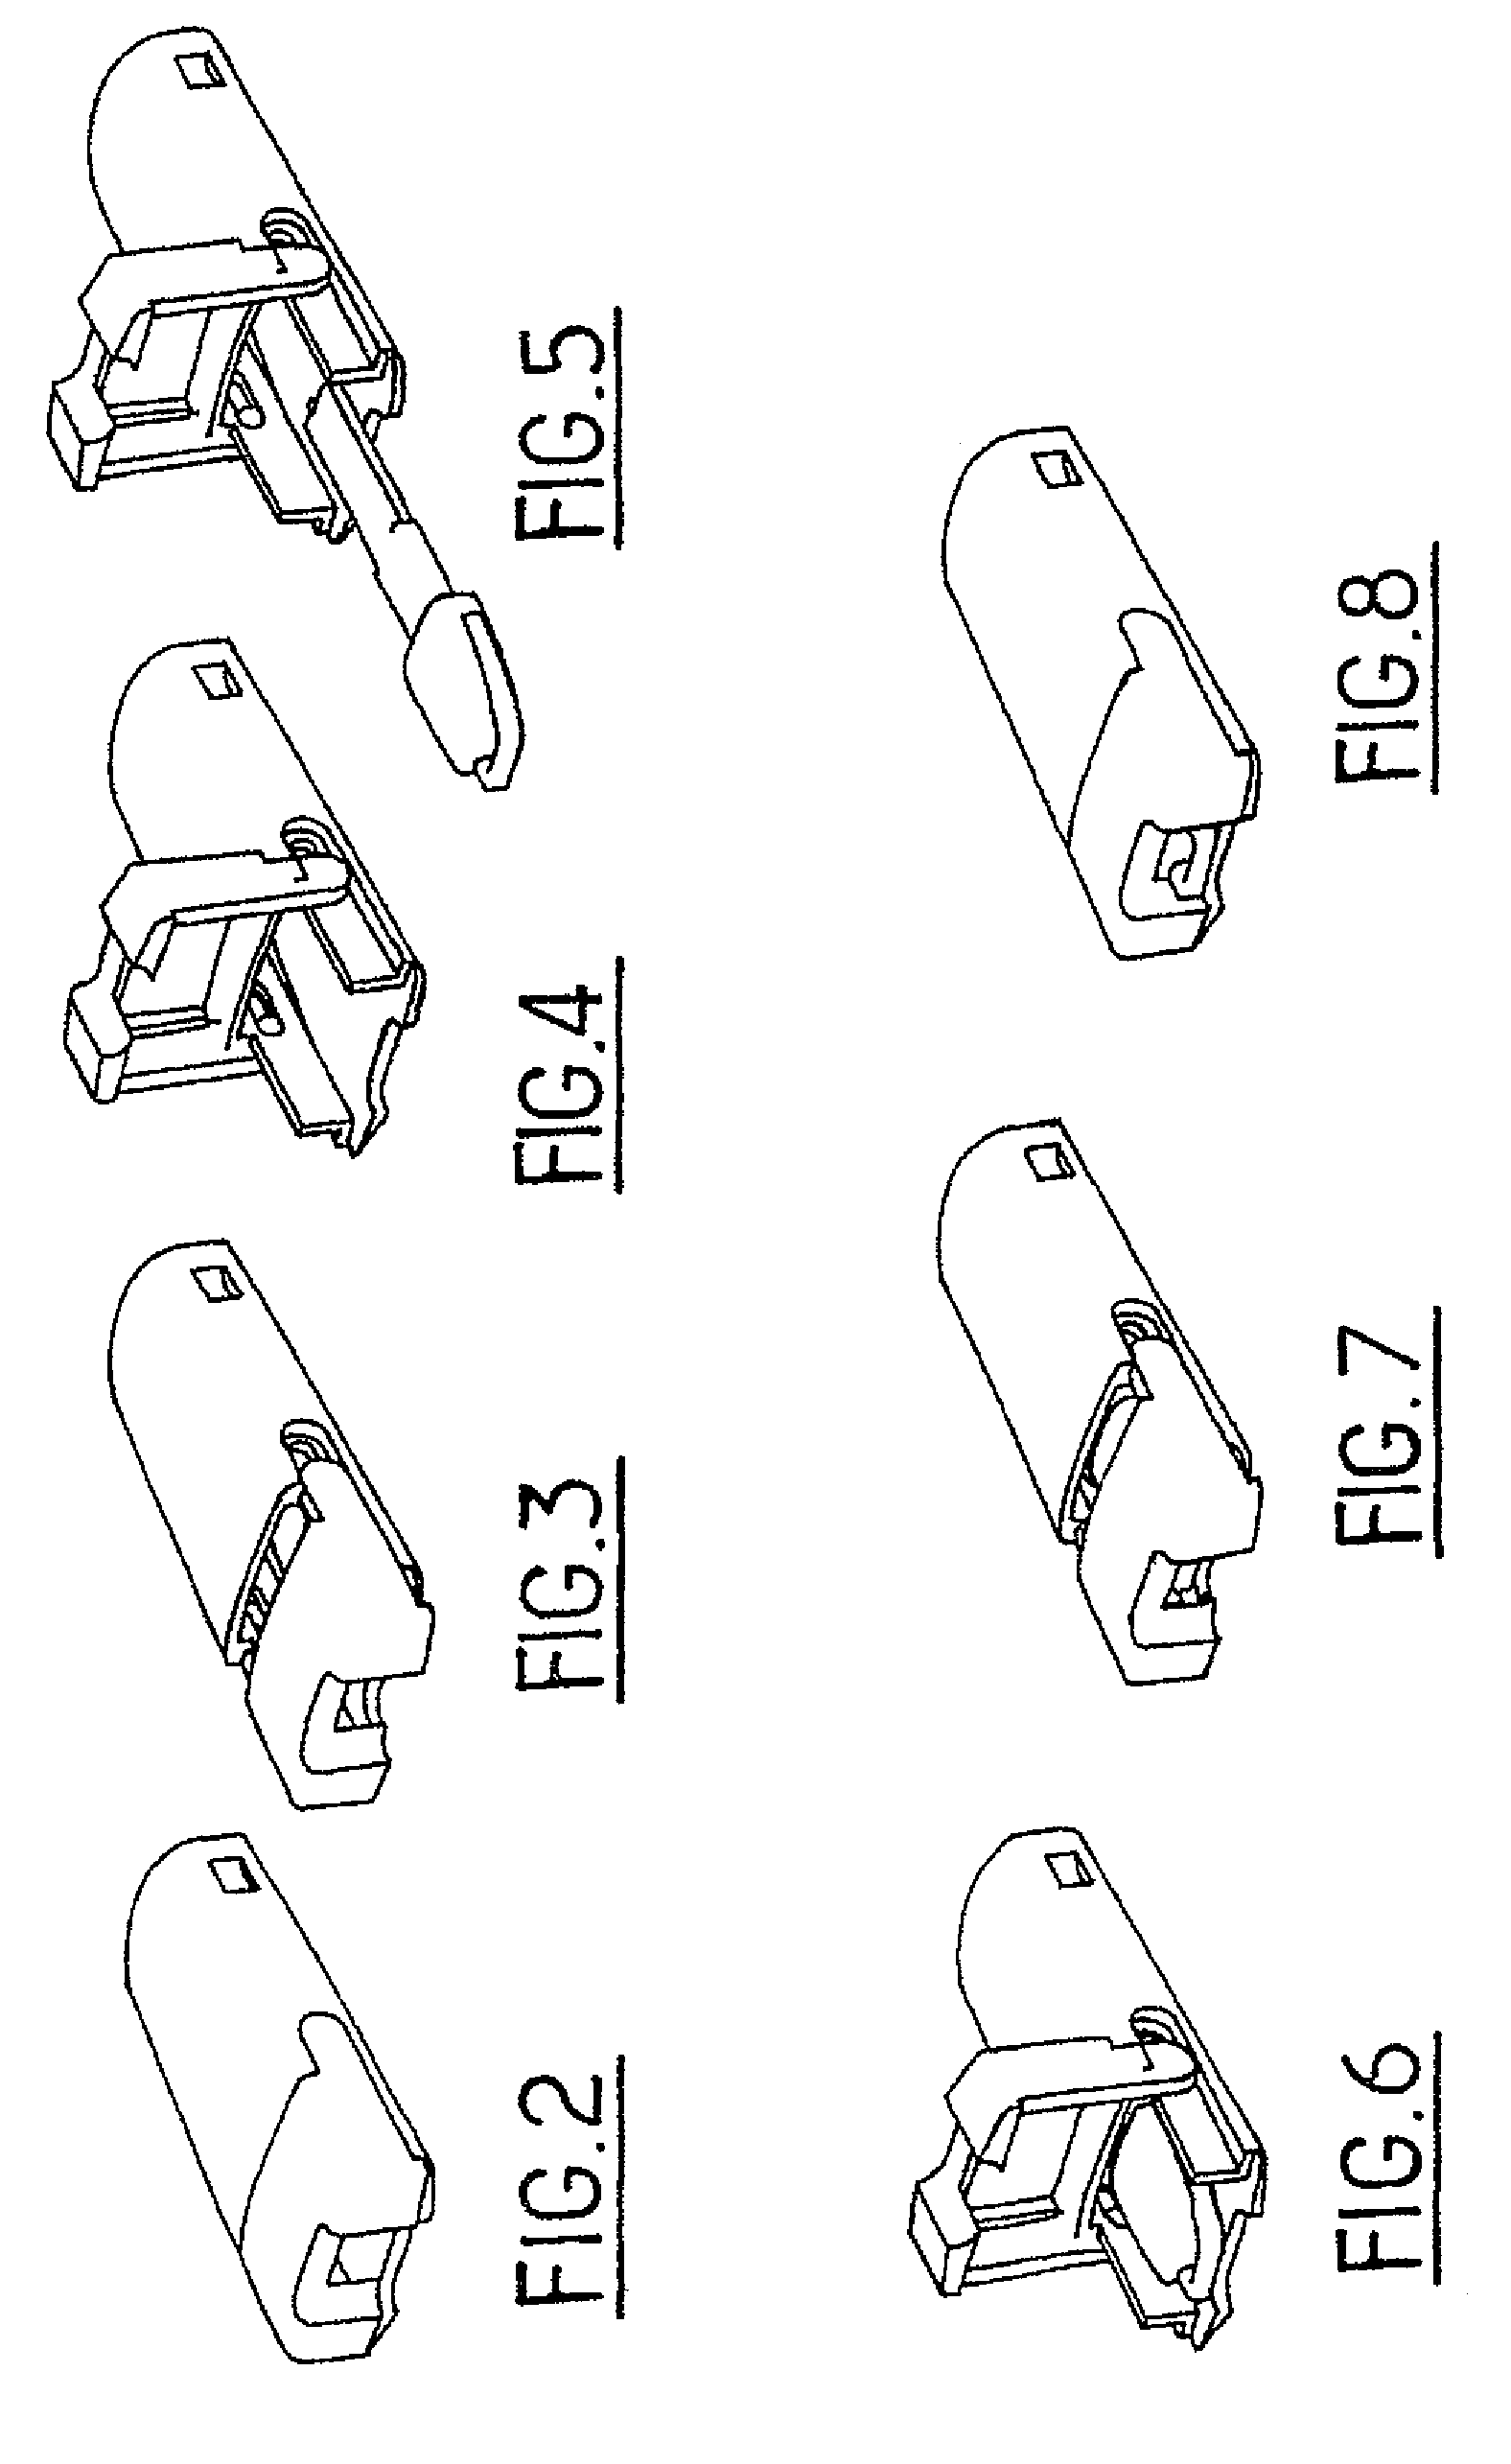 Device for positioning and holding an emergency key